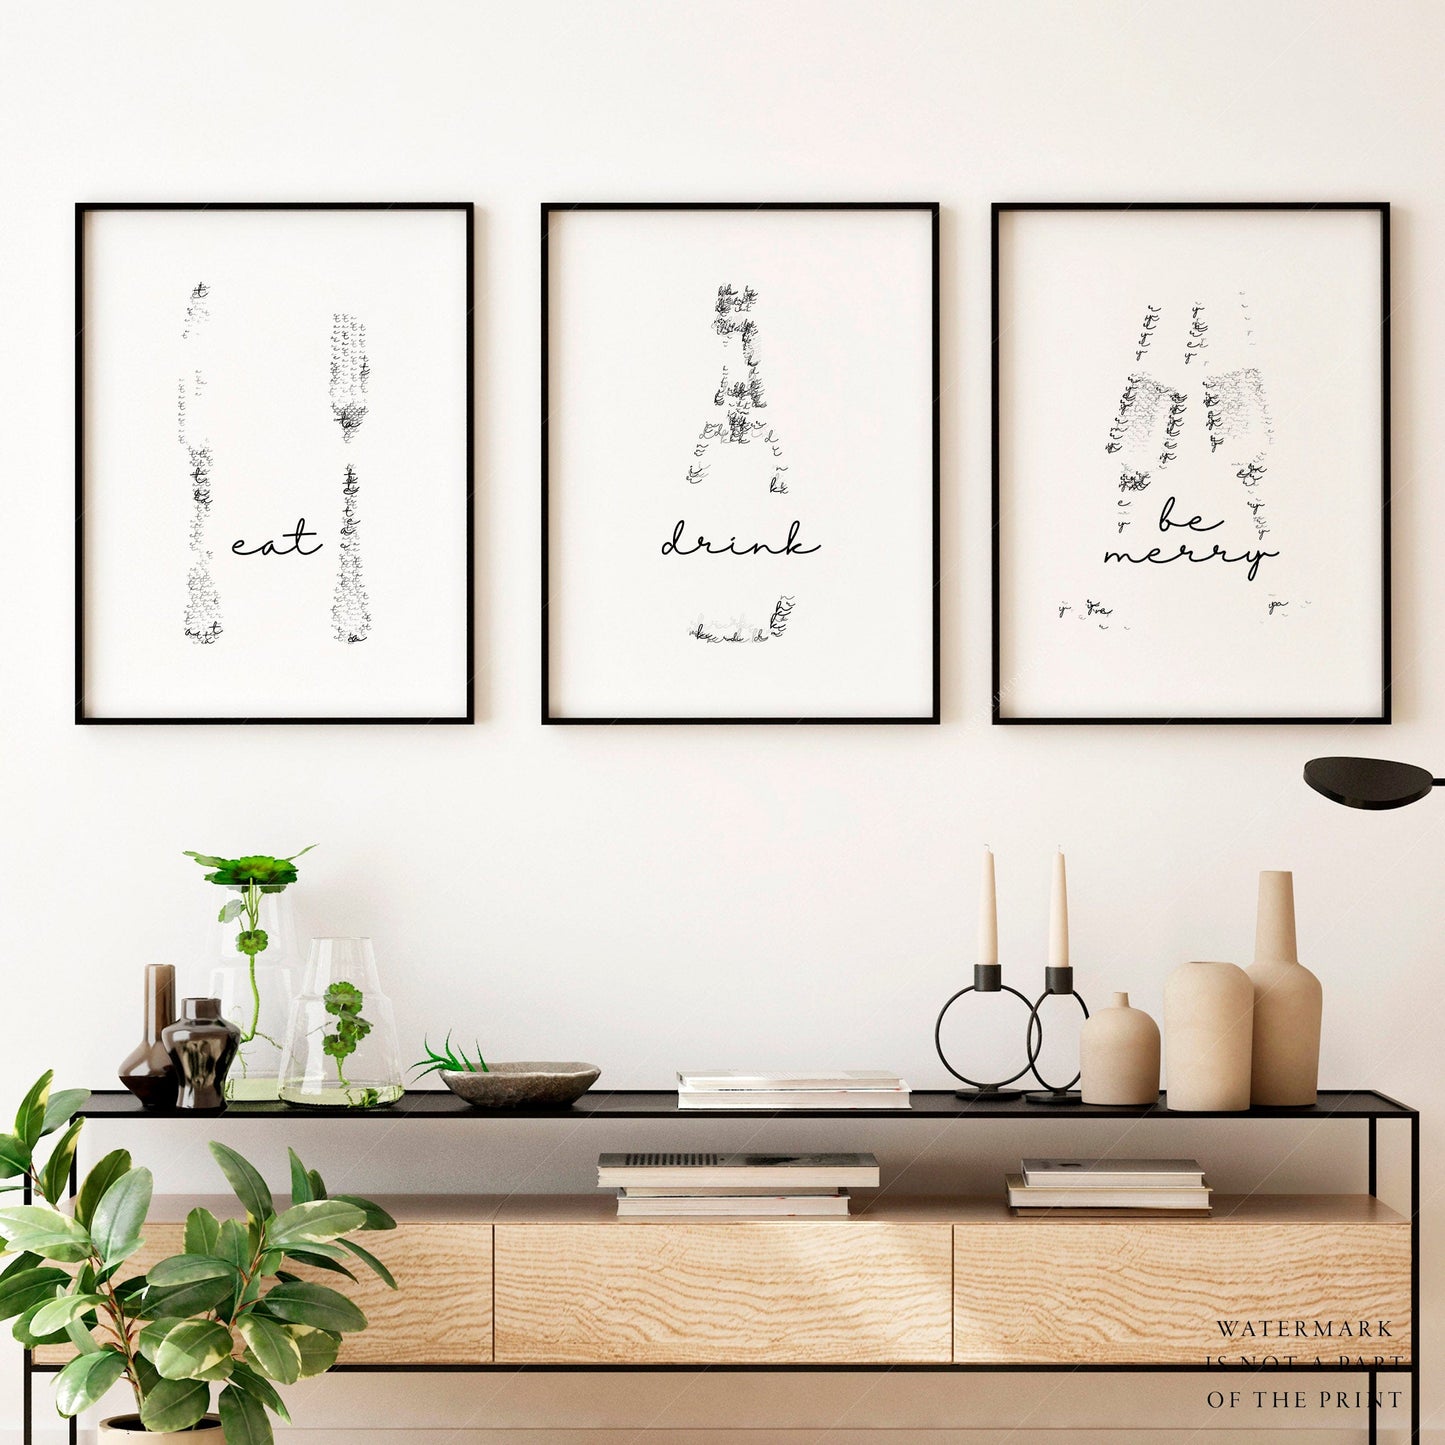 Home Poster Decor Set of 3 Eat Drink Be merry, Welcome sign, Dinin Room Print, Kitchen Set of 3, Cheers Print, Minimalist decor, Modern Kitchen, Wedding party